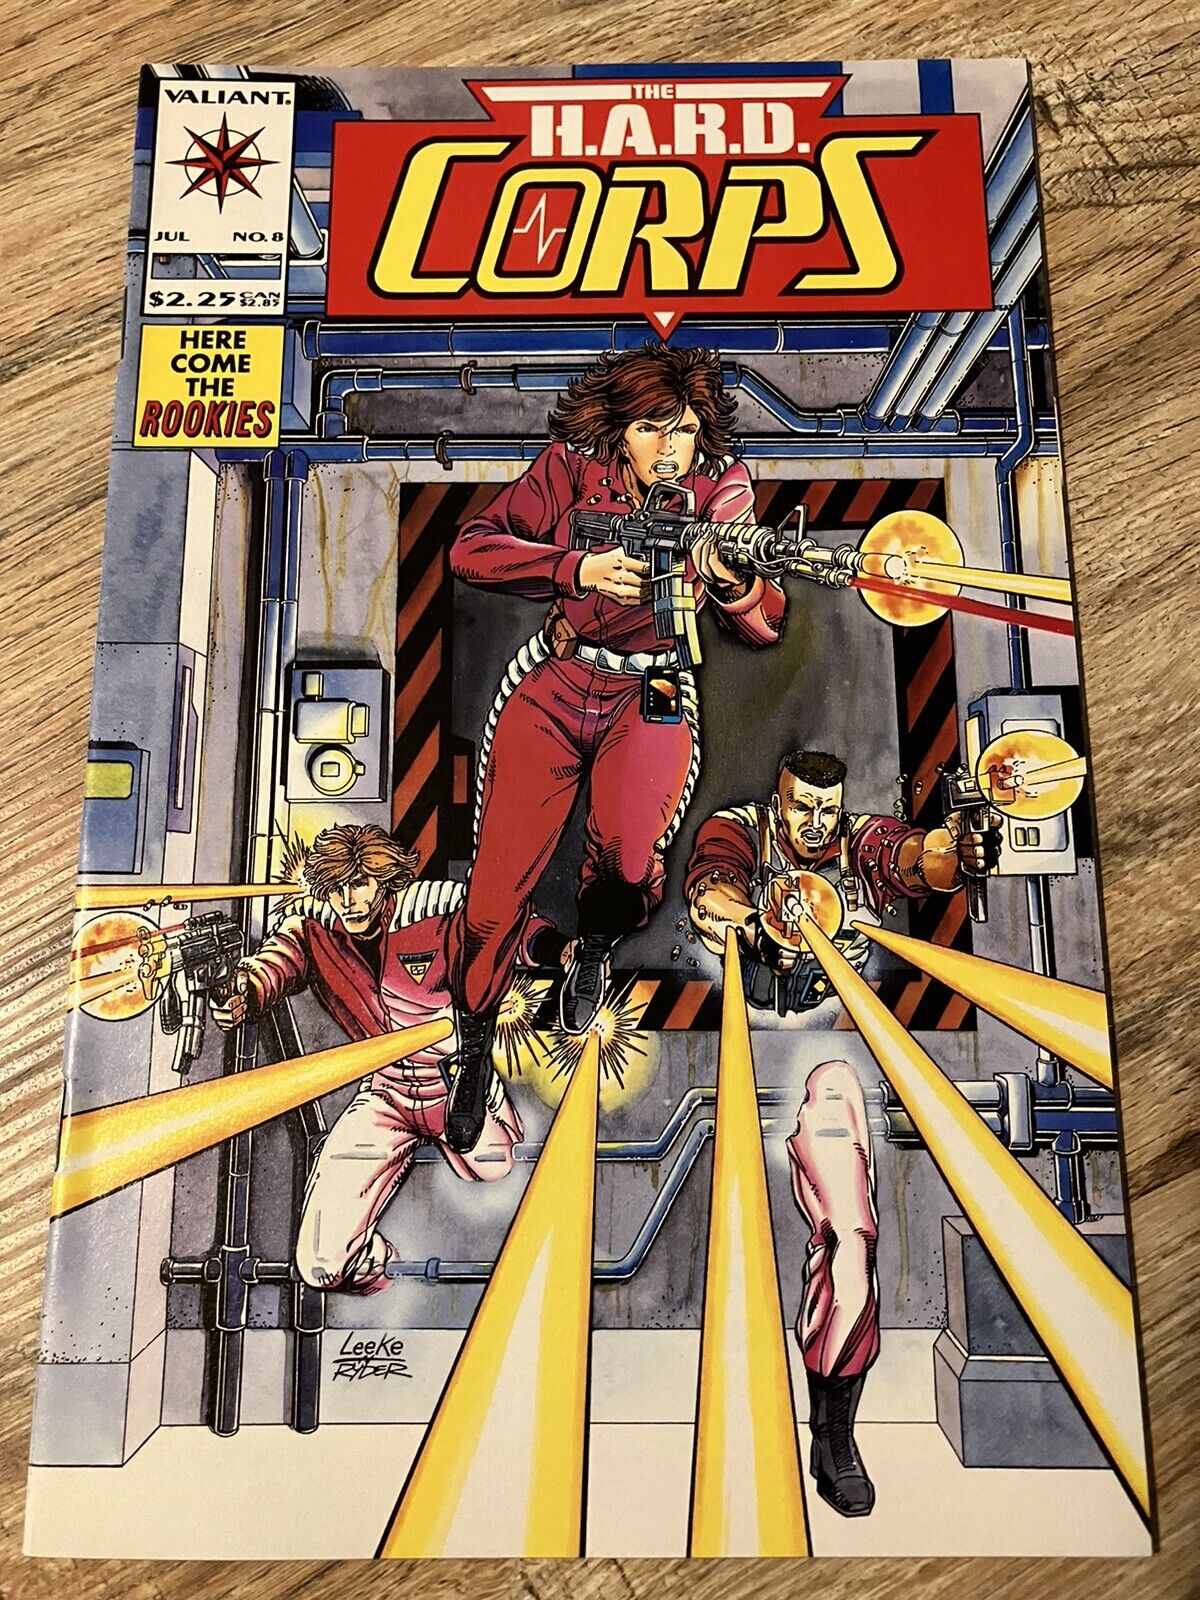 THE HARD CORPS #8 Here Come The Rookies- VALIANT COMICS (1993) VF-NM